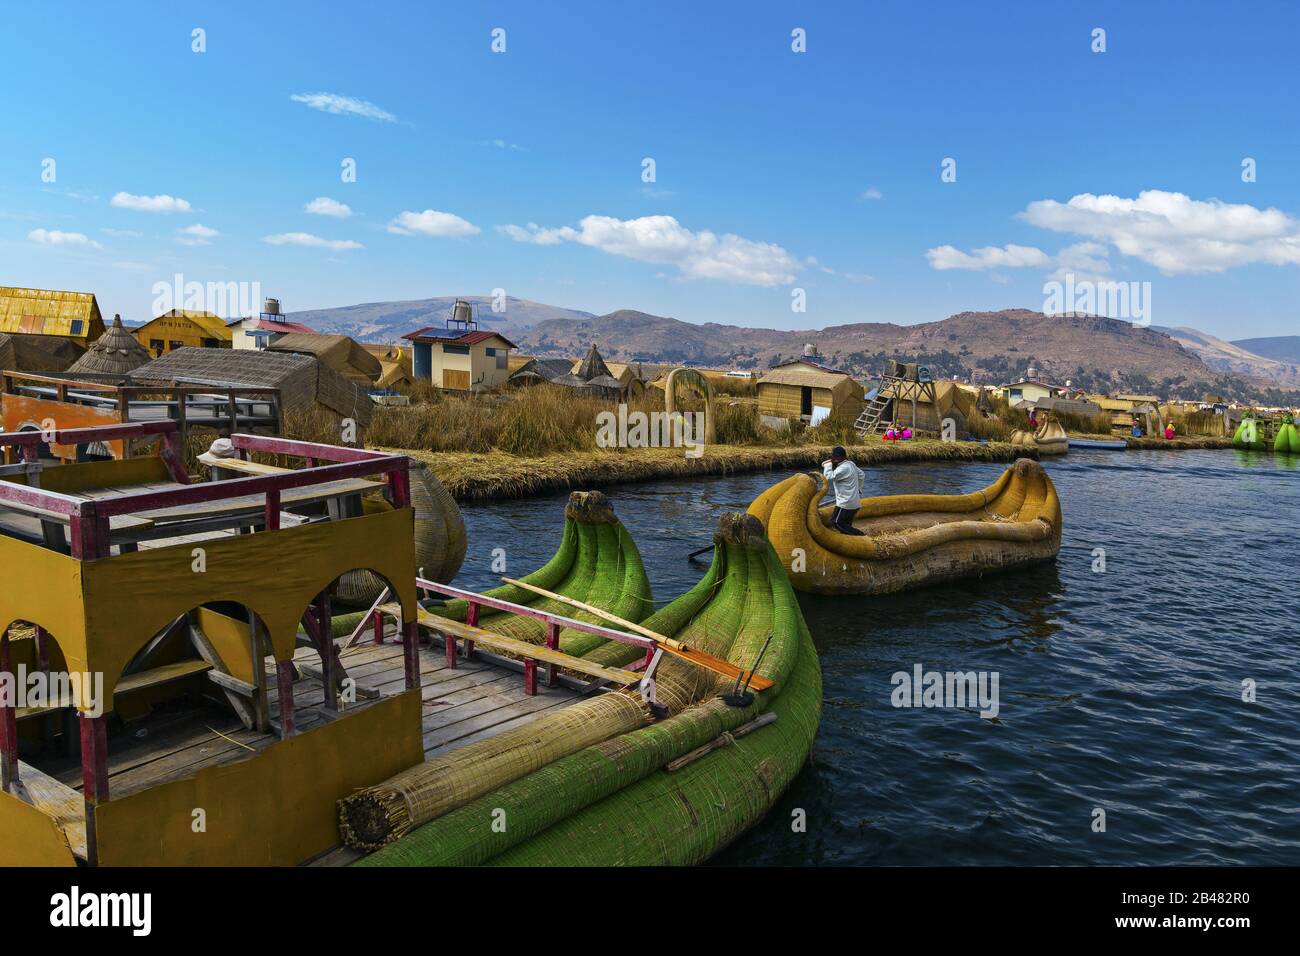 View of Uros floating islands with typical boats, Puno, Peru Stock Photo